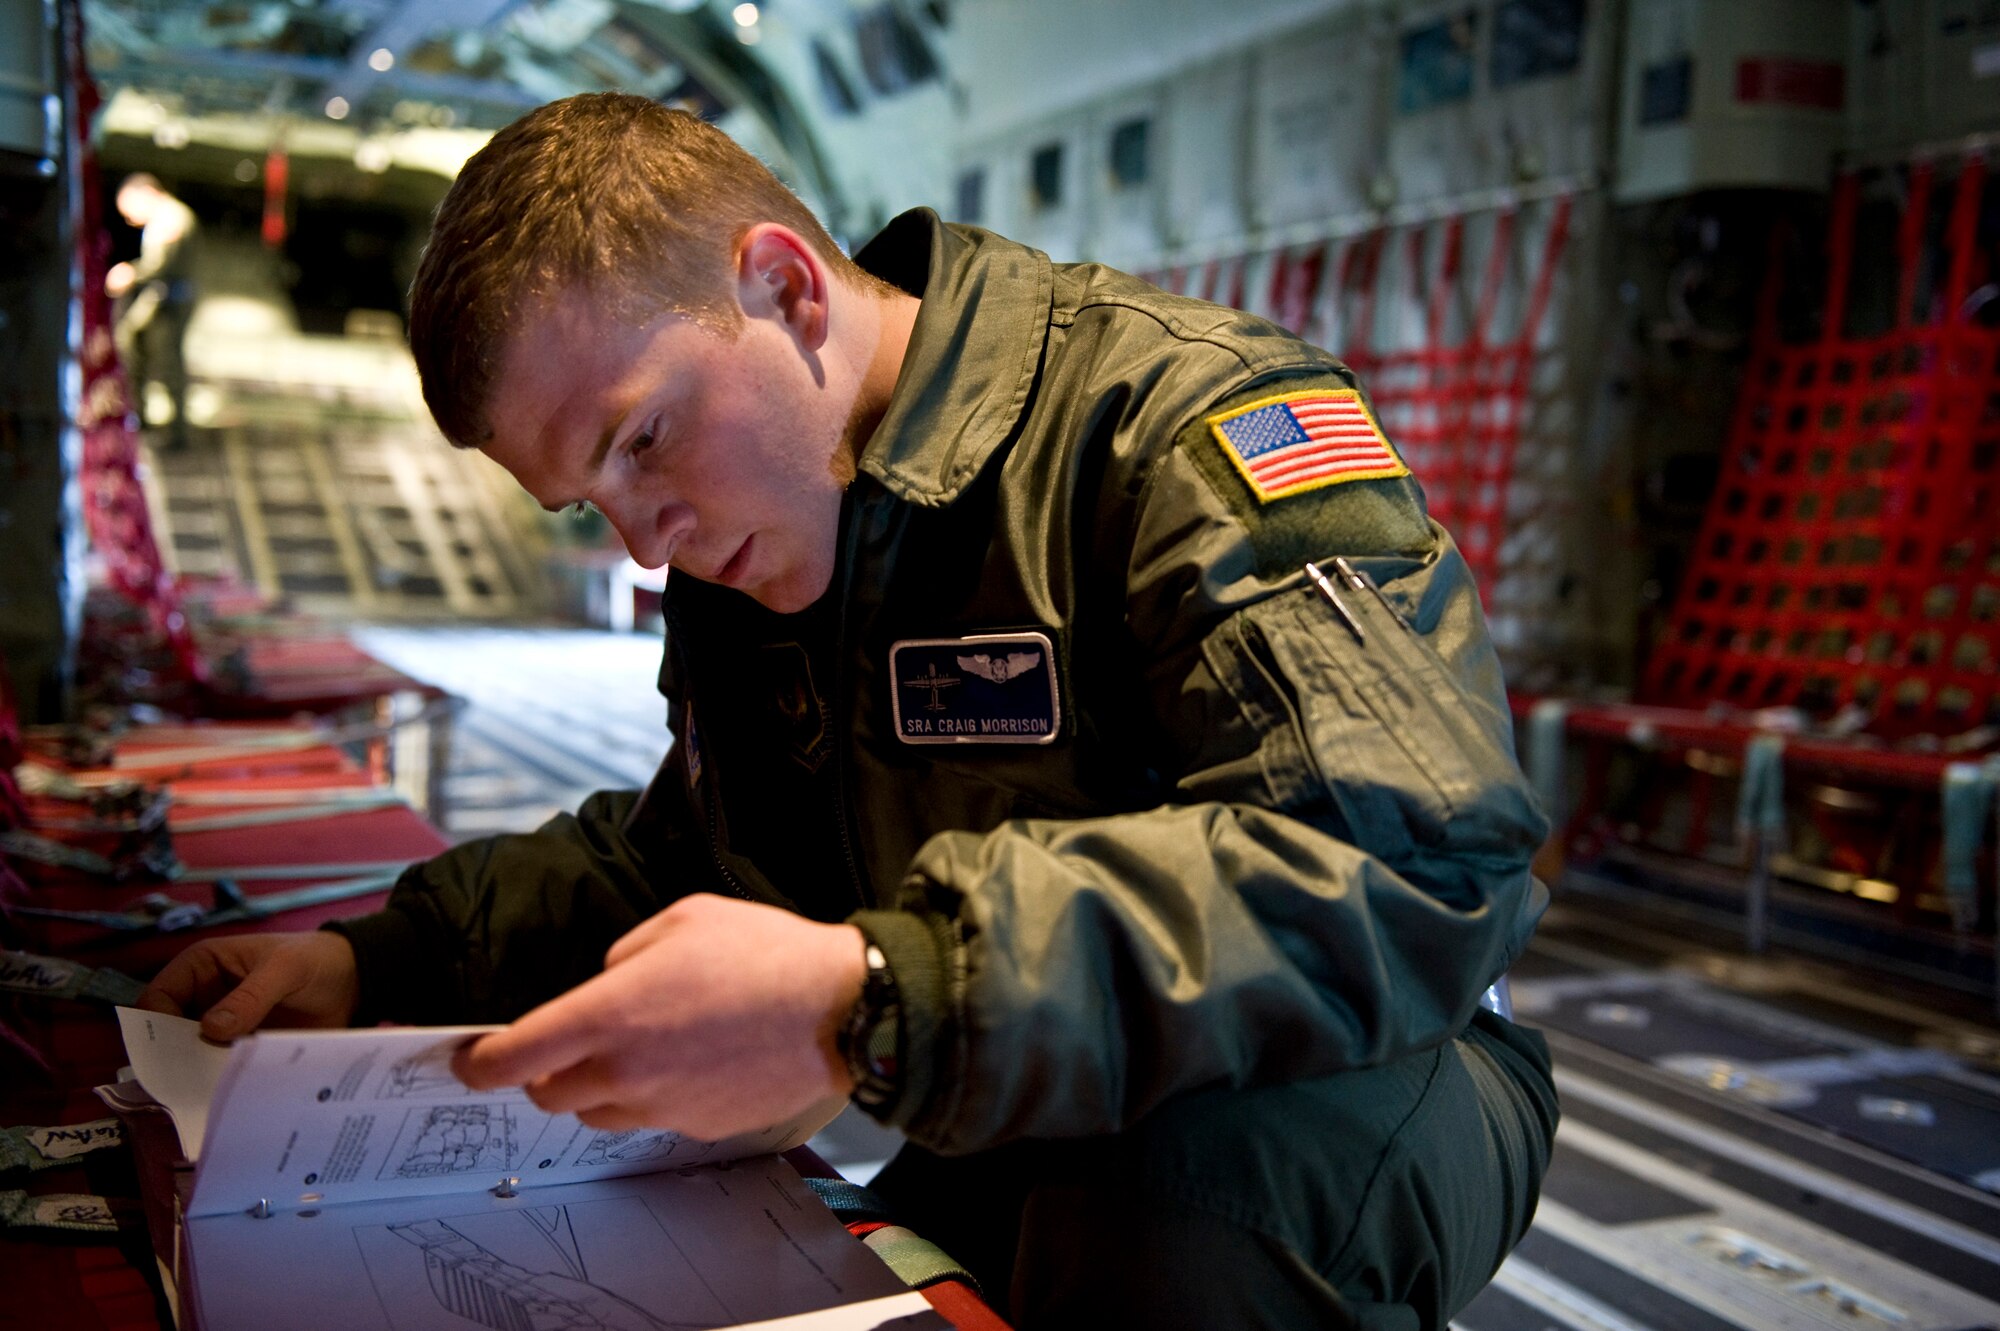 U.S. Air Force Senior Airman Craig Morrison, 37th Airlift Squadron, reviews the aircraft checklist of a C-130J Hercules, from Ramstein Air Base, Germany in preparation for an airdrop mission over the Marnheim, Germany drop zone, Feb. 10, 2011. The single C-130J aircraft from the 37th Airlift Squadron, 86th Airlift Wing dropped more than fifty service members at the drop site.  (U.S. Air Force photo/TSgt Wayne Clark, AFNE Regional News Bureau) (Released)